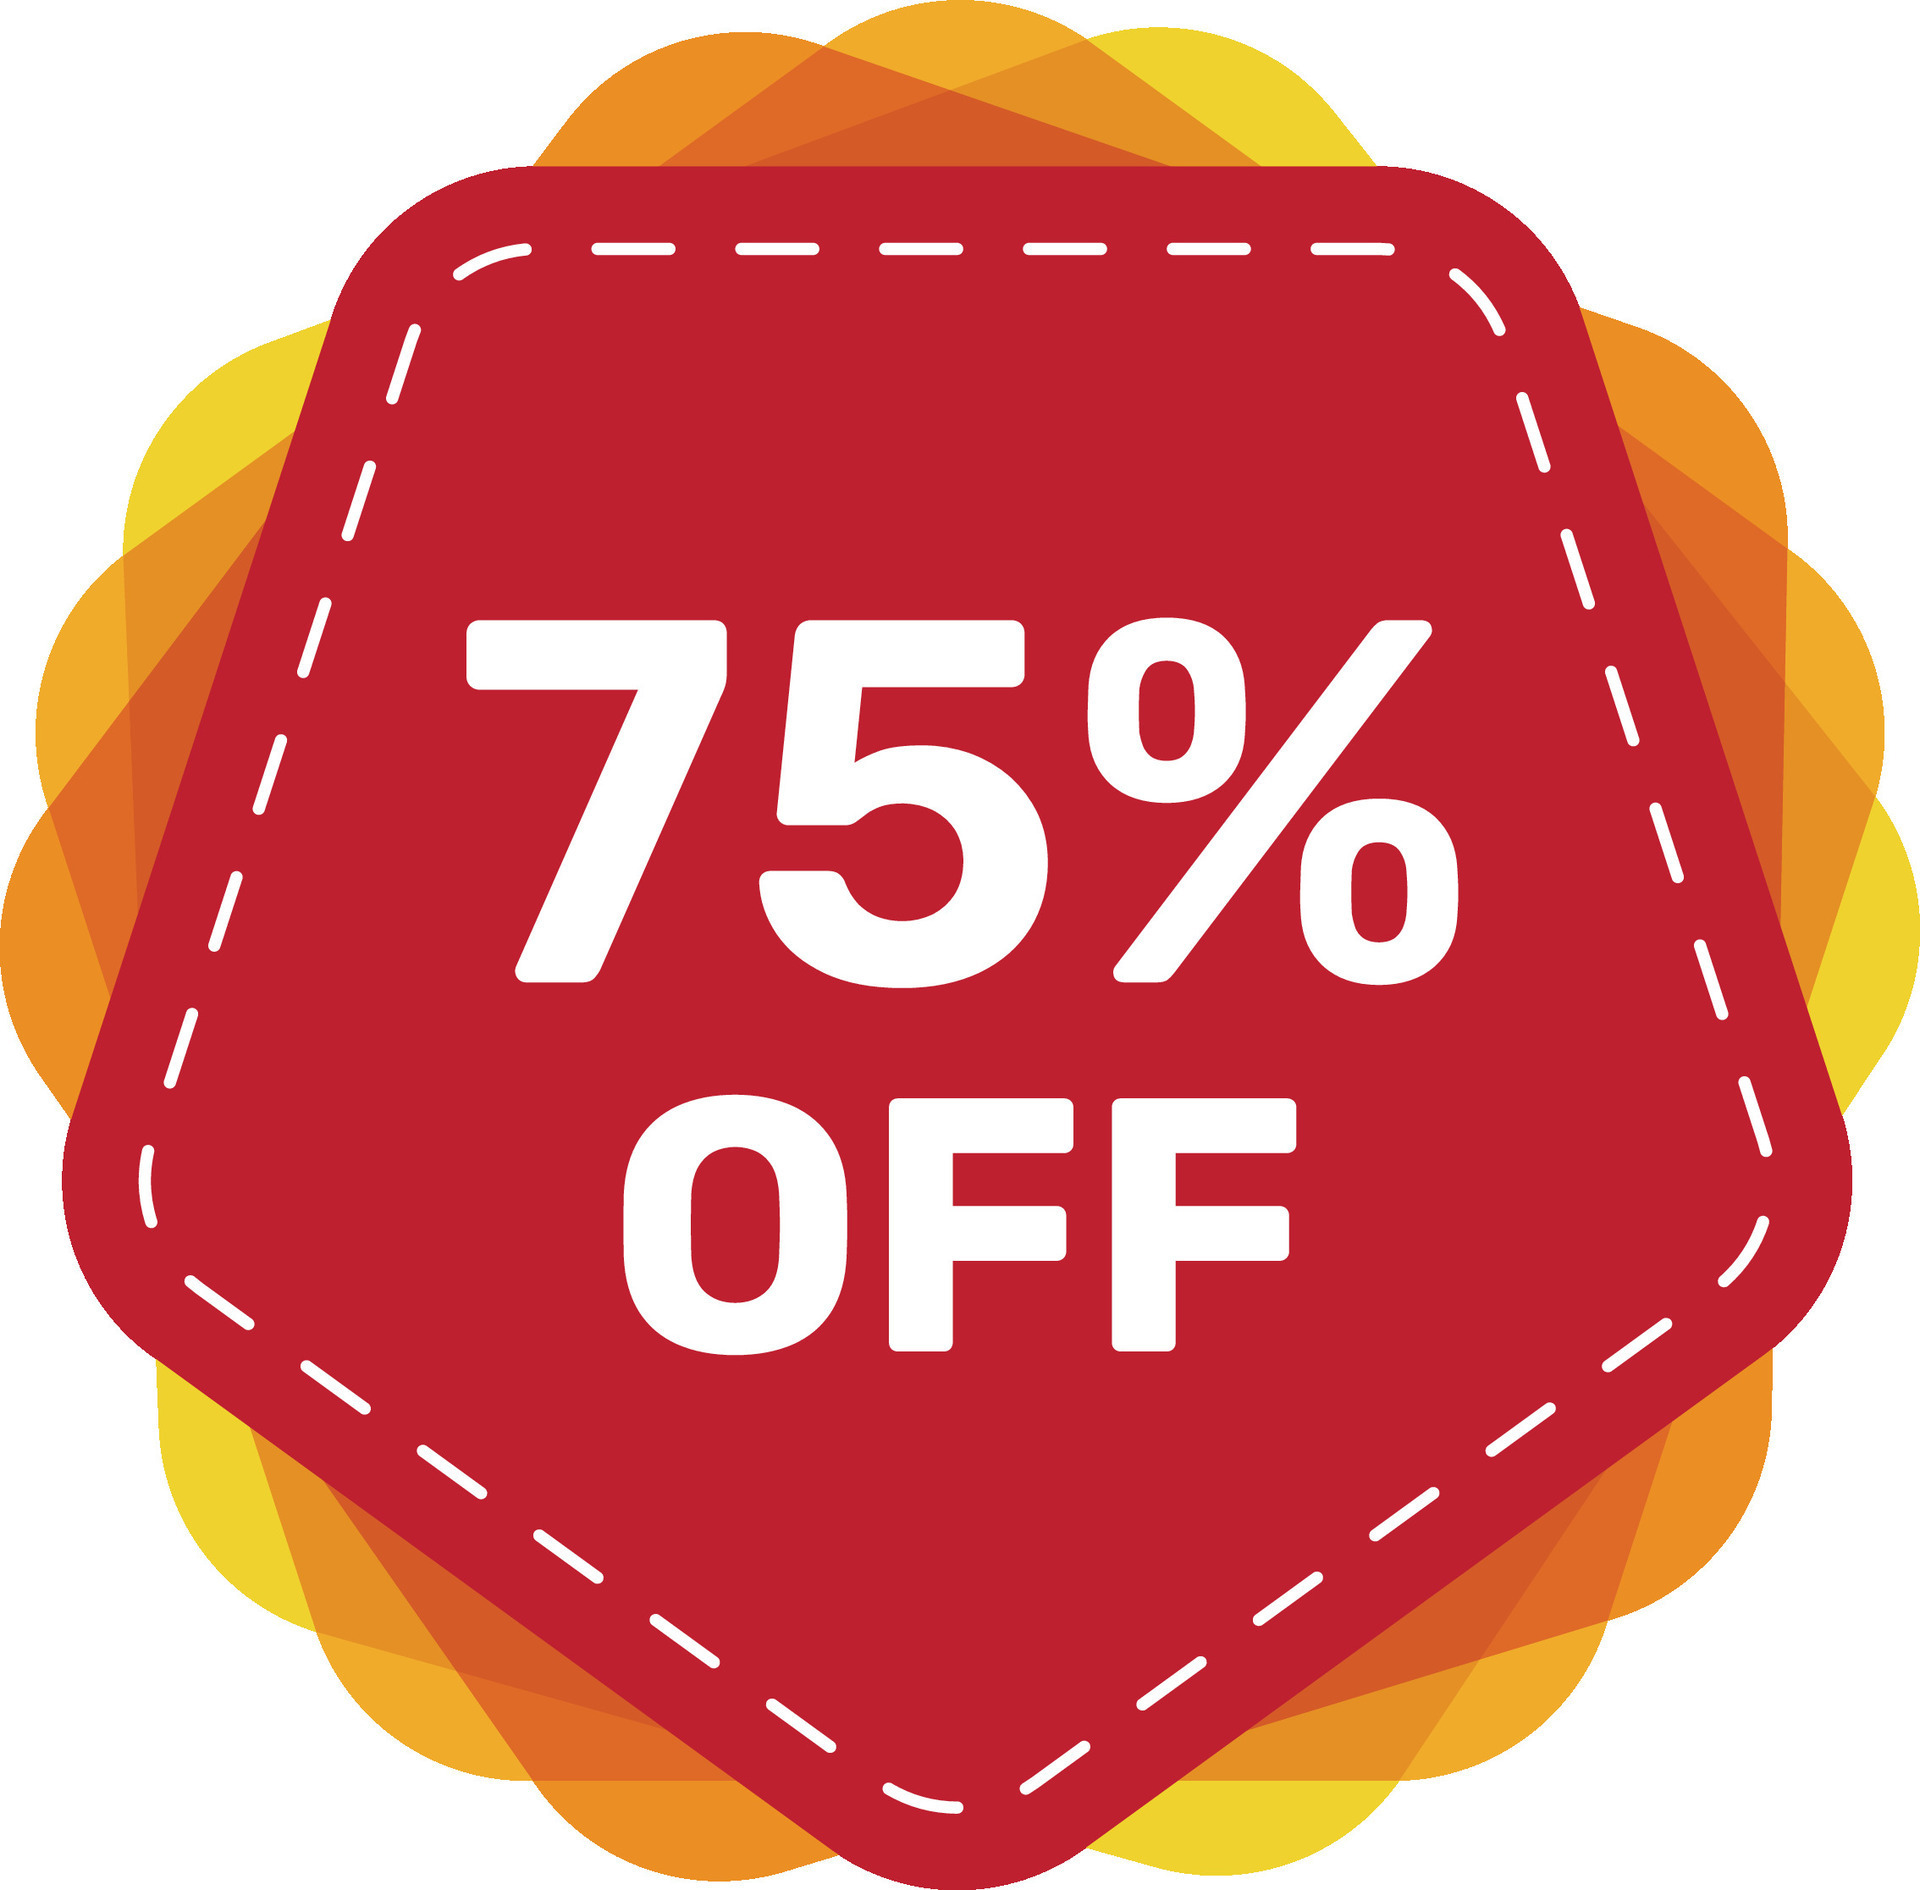 https://static.vecteezy.com/system/resources/previews/026/444/142/original/75-off-discount-sticker-special-offer-sale-red-tag-isolated-illustration-discount-offer-price-label-symbol-for-advertising-campaign-in-retail-sale-promo-marketing-ad-offer-on-shopping-day-vector.jpg